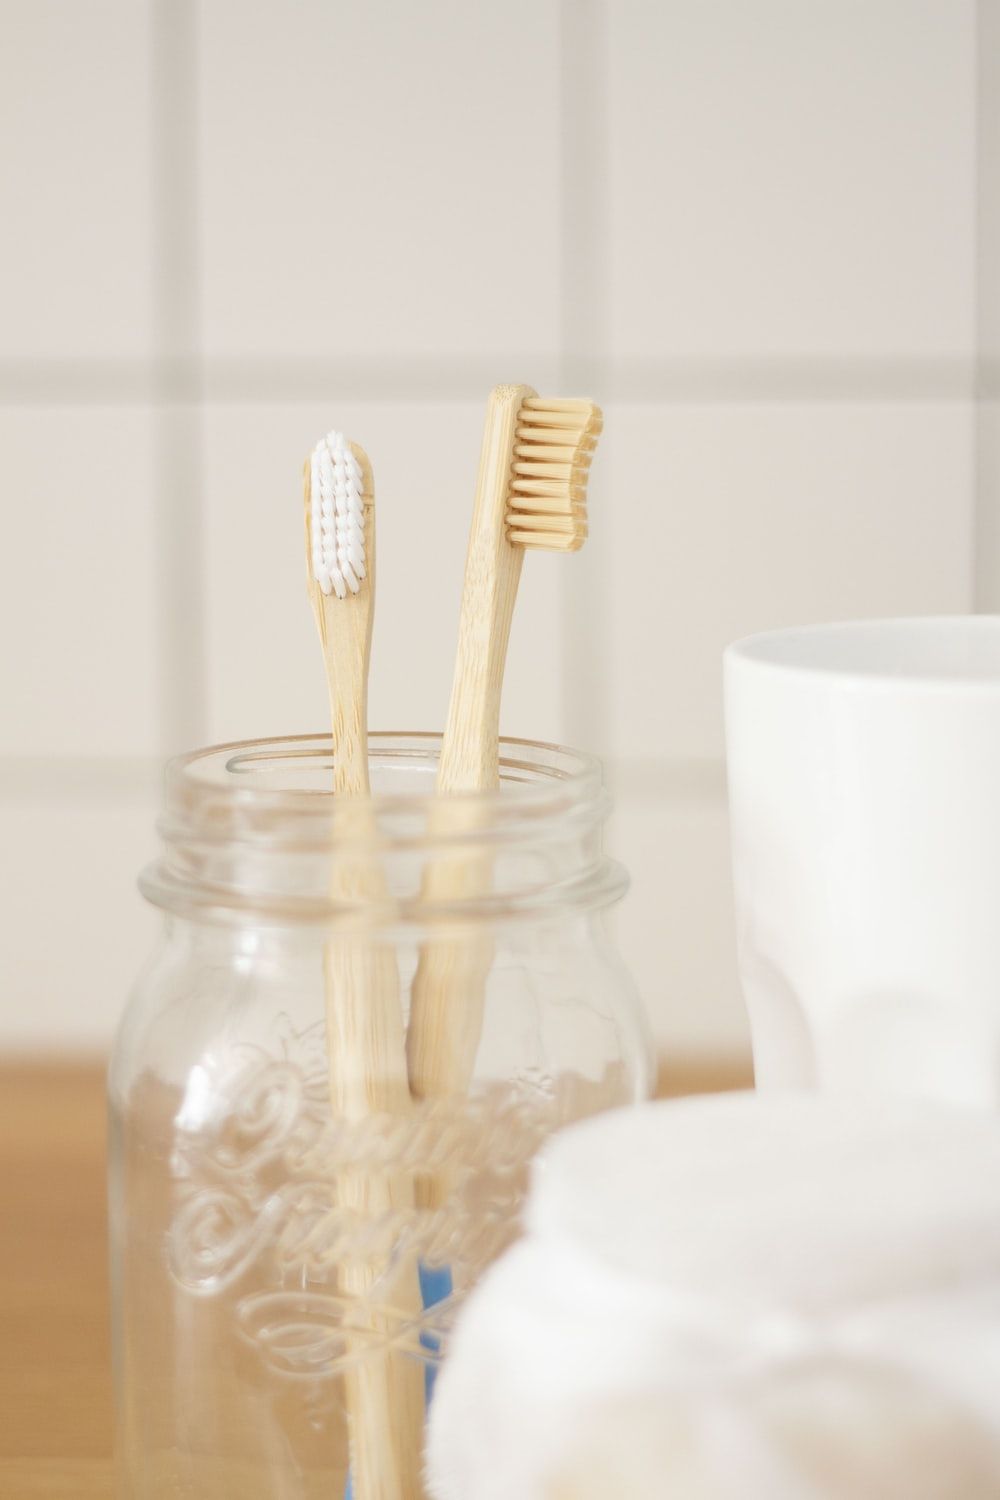 Tooth Brush Picture. Download Free Image